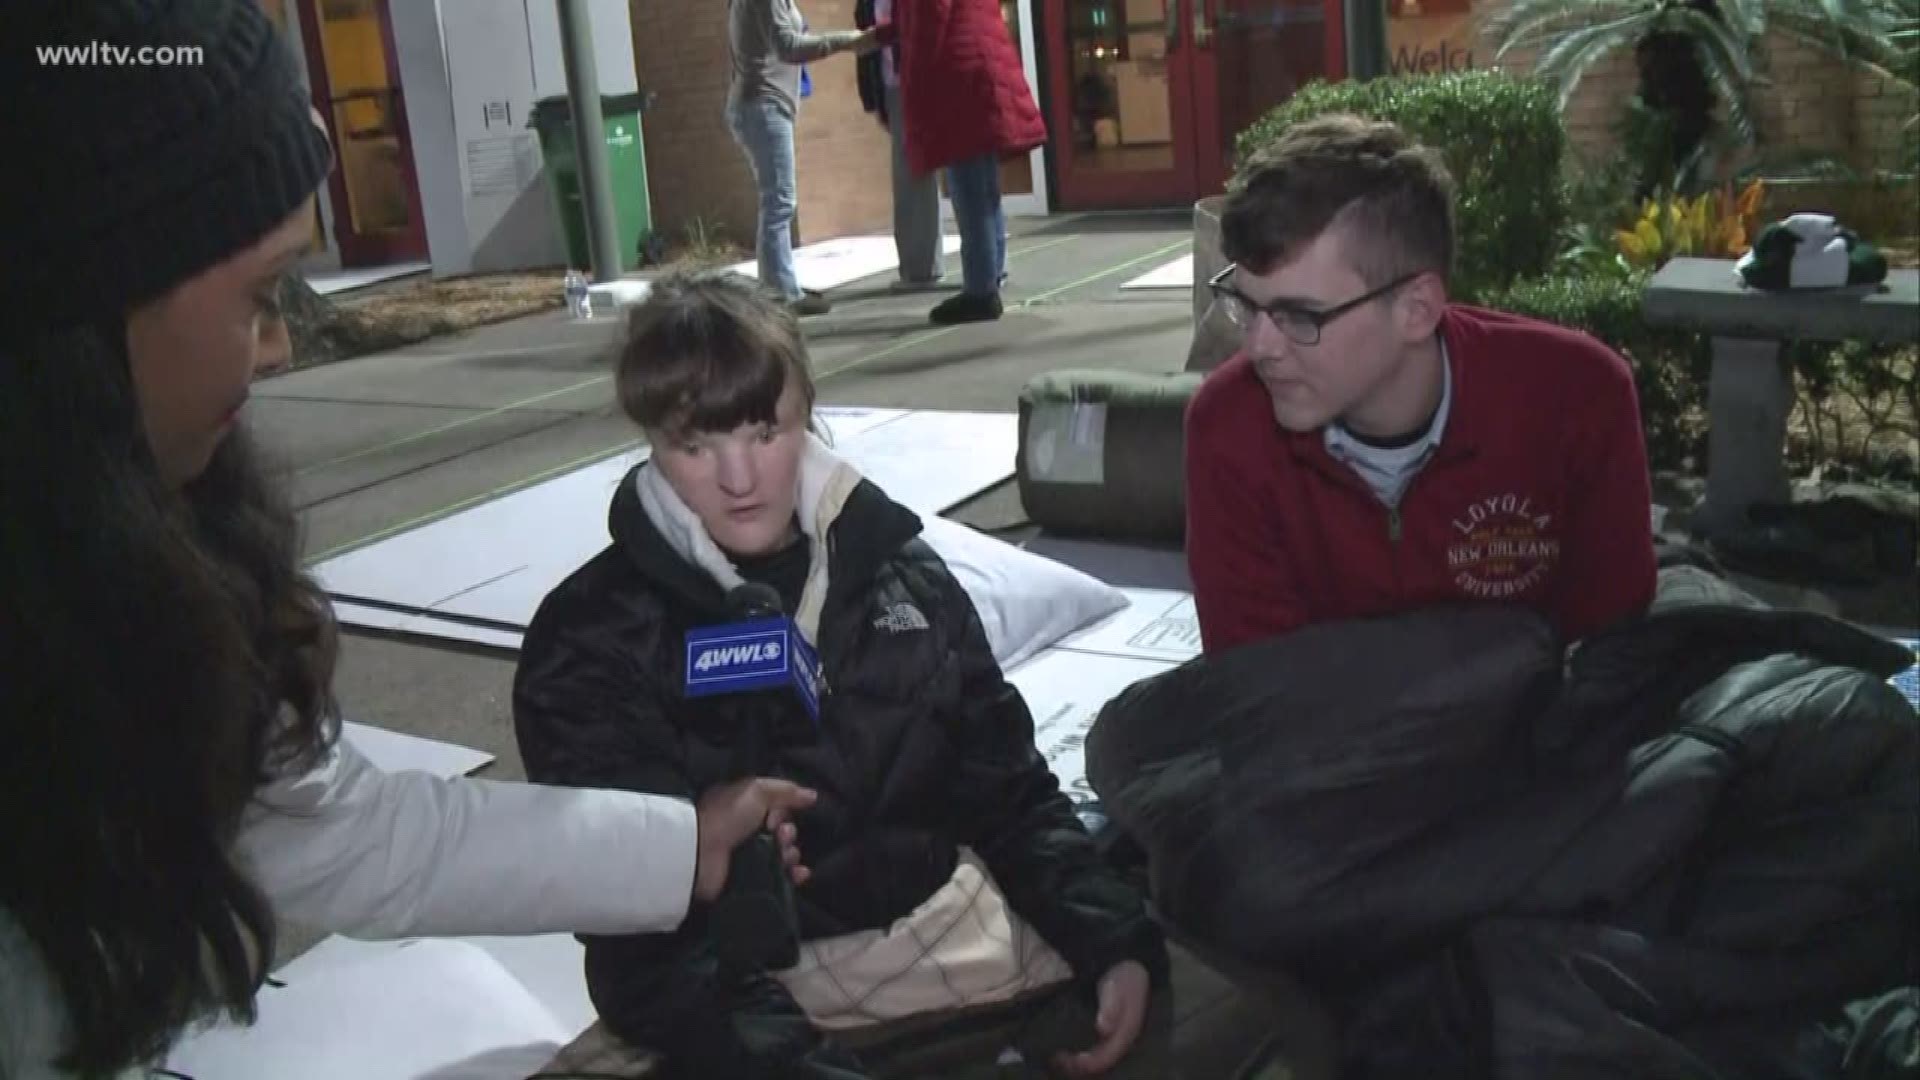 The Covenant House annual "Sleep Out Event" raises money to help homeless teenagers.